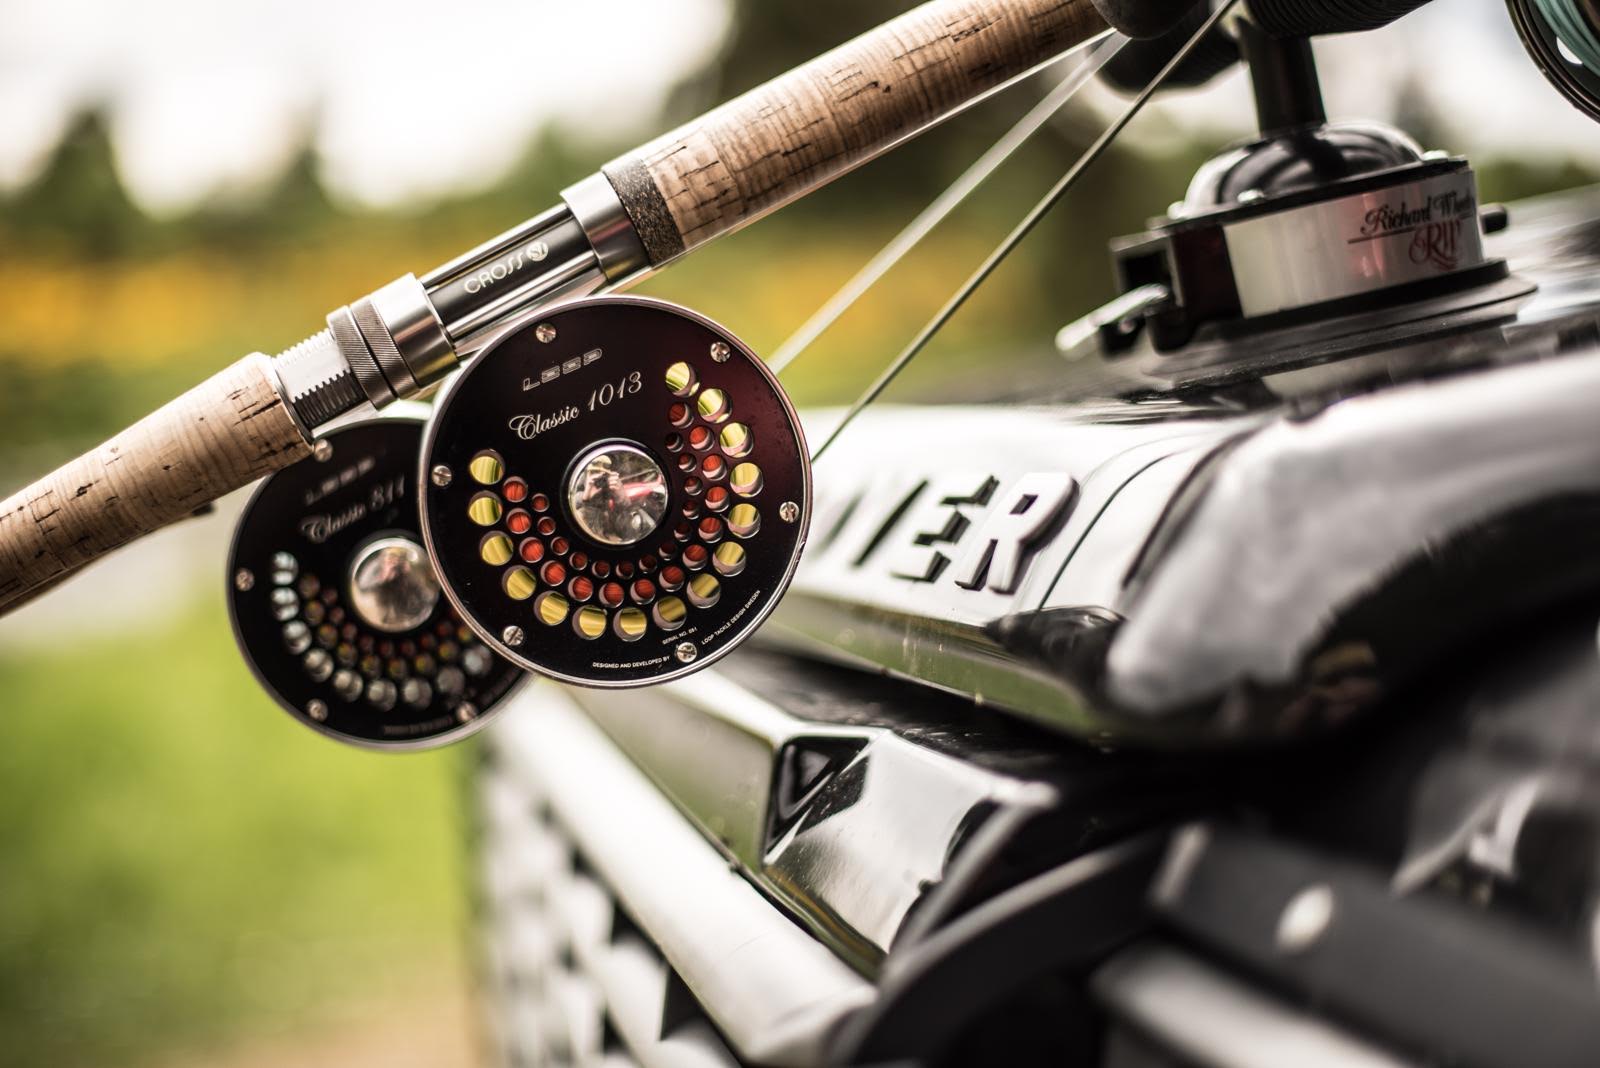 Farlows on X: The best salmon fishing gear is all about classic